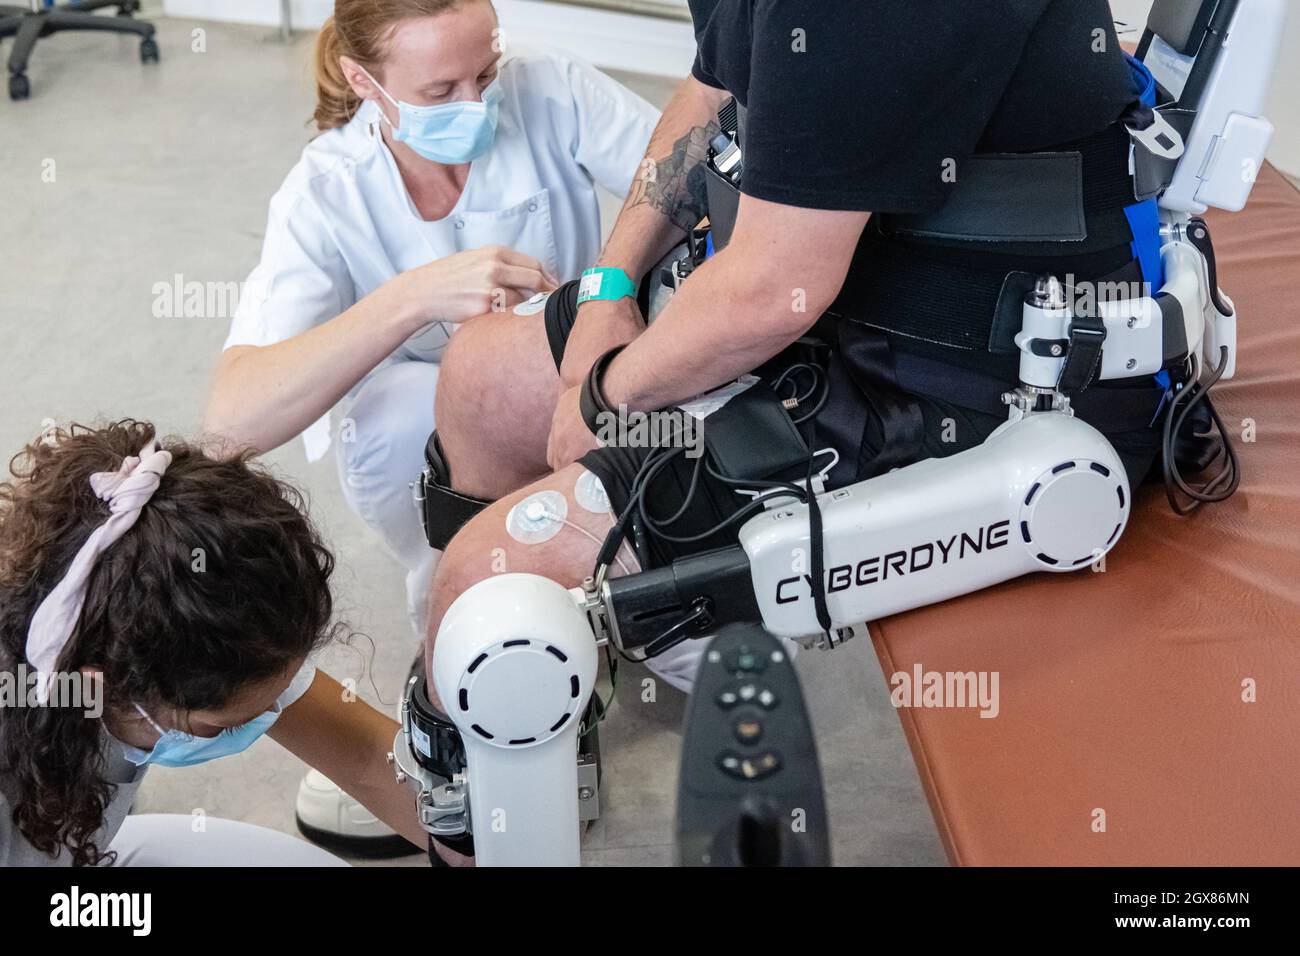 St Genis Laval (France), 4 October 2021. Rehabilitation session of a patient equipped with the HAL exoskeleton. Two nurses prepare the installation on Stock Photo